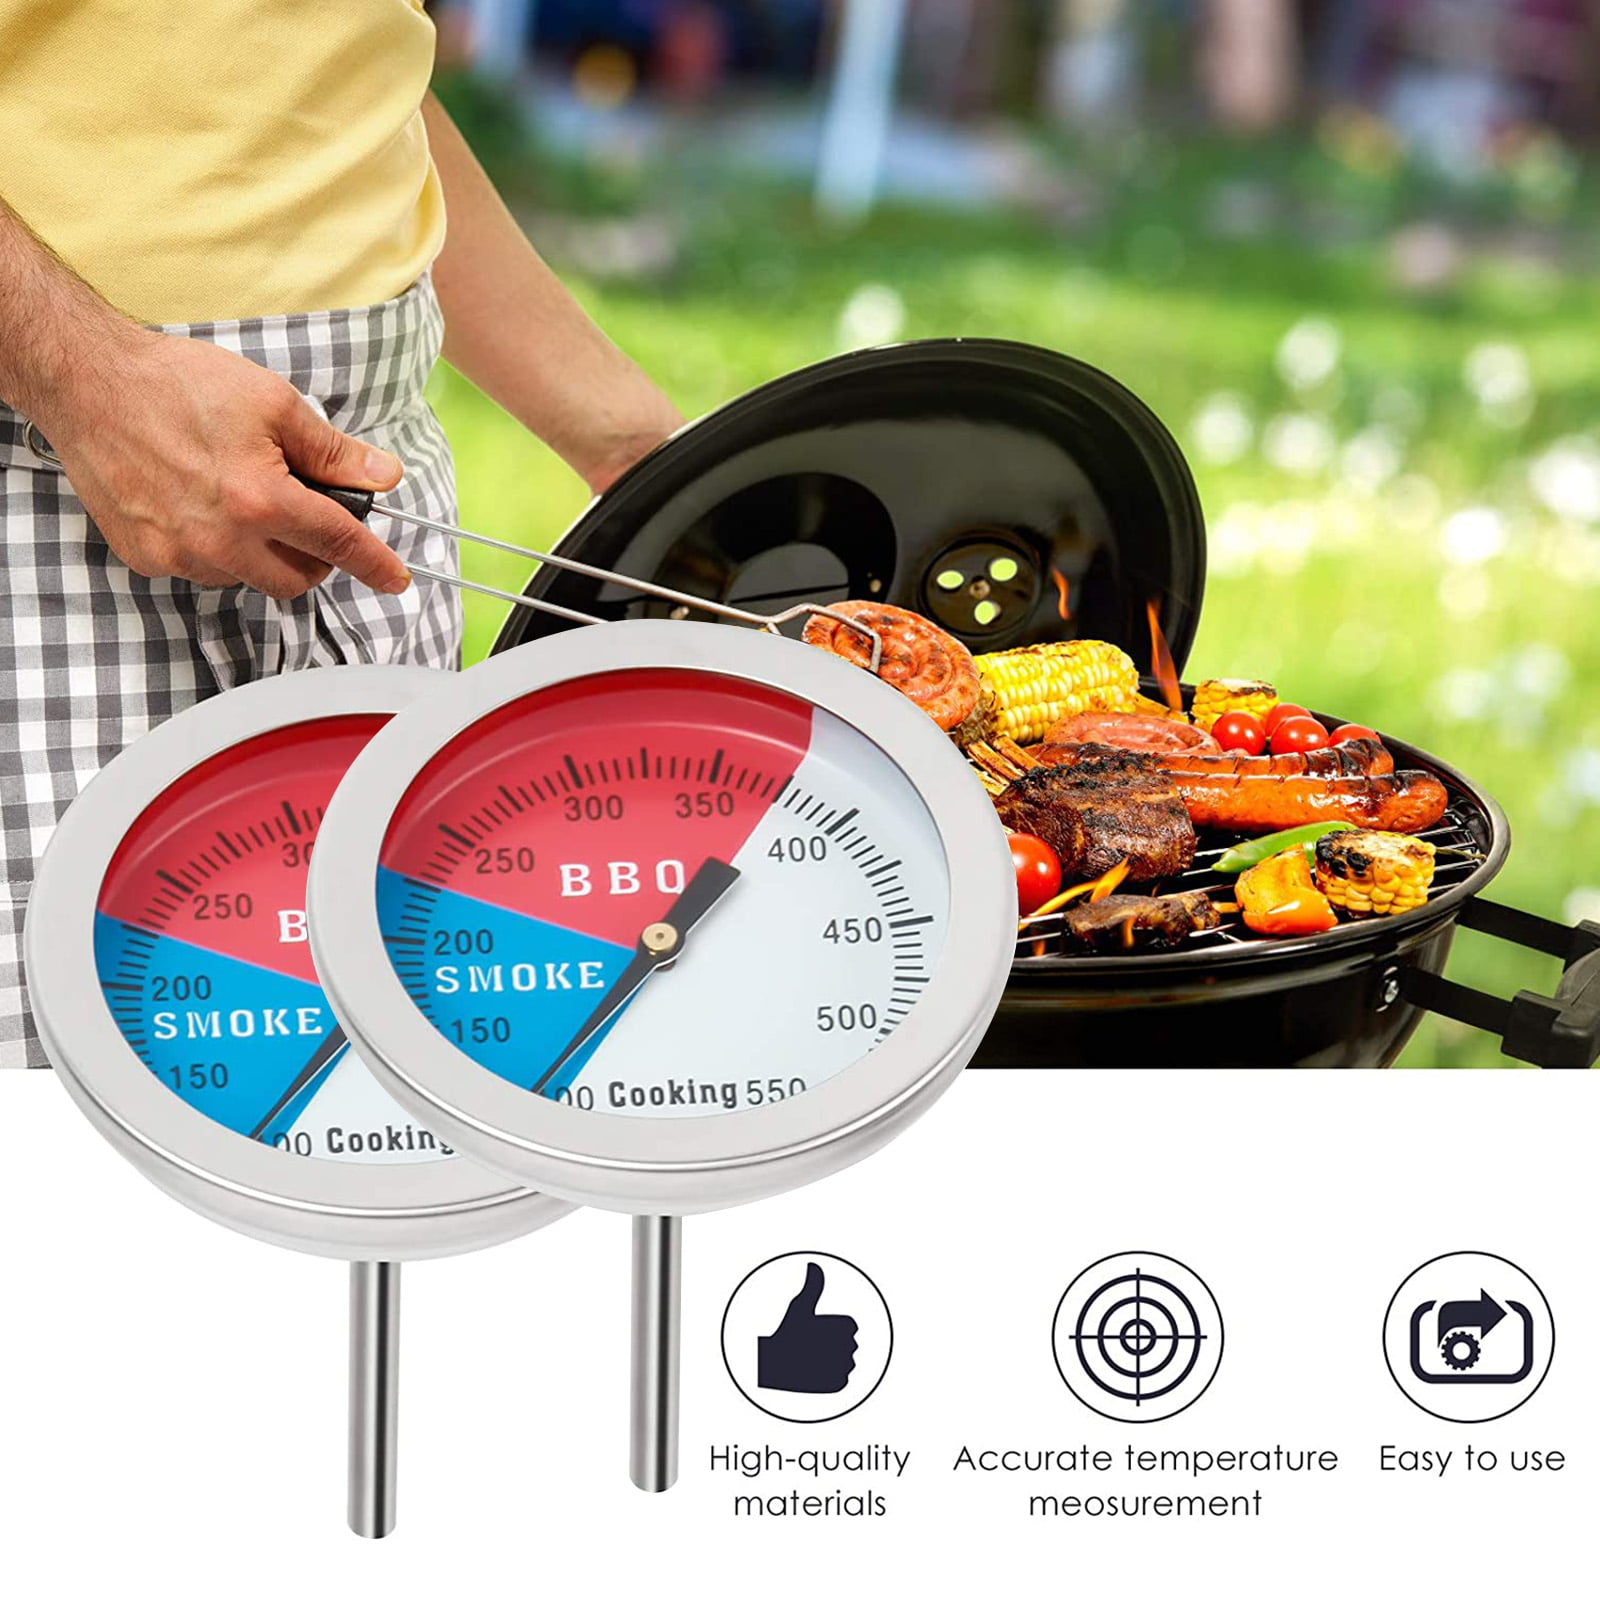 3 Inch Temperature Thermometer GaugeBarbecue BBQ Grill Smoker Thermostat 